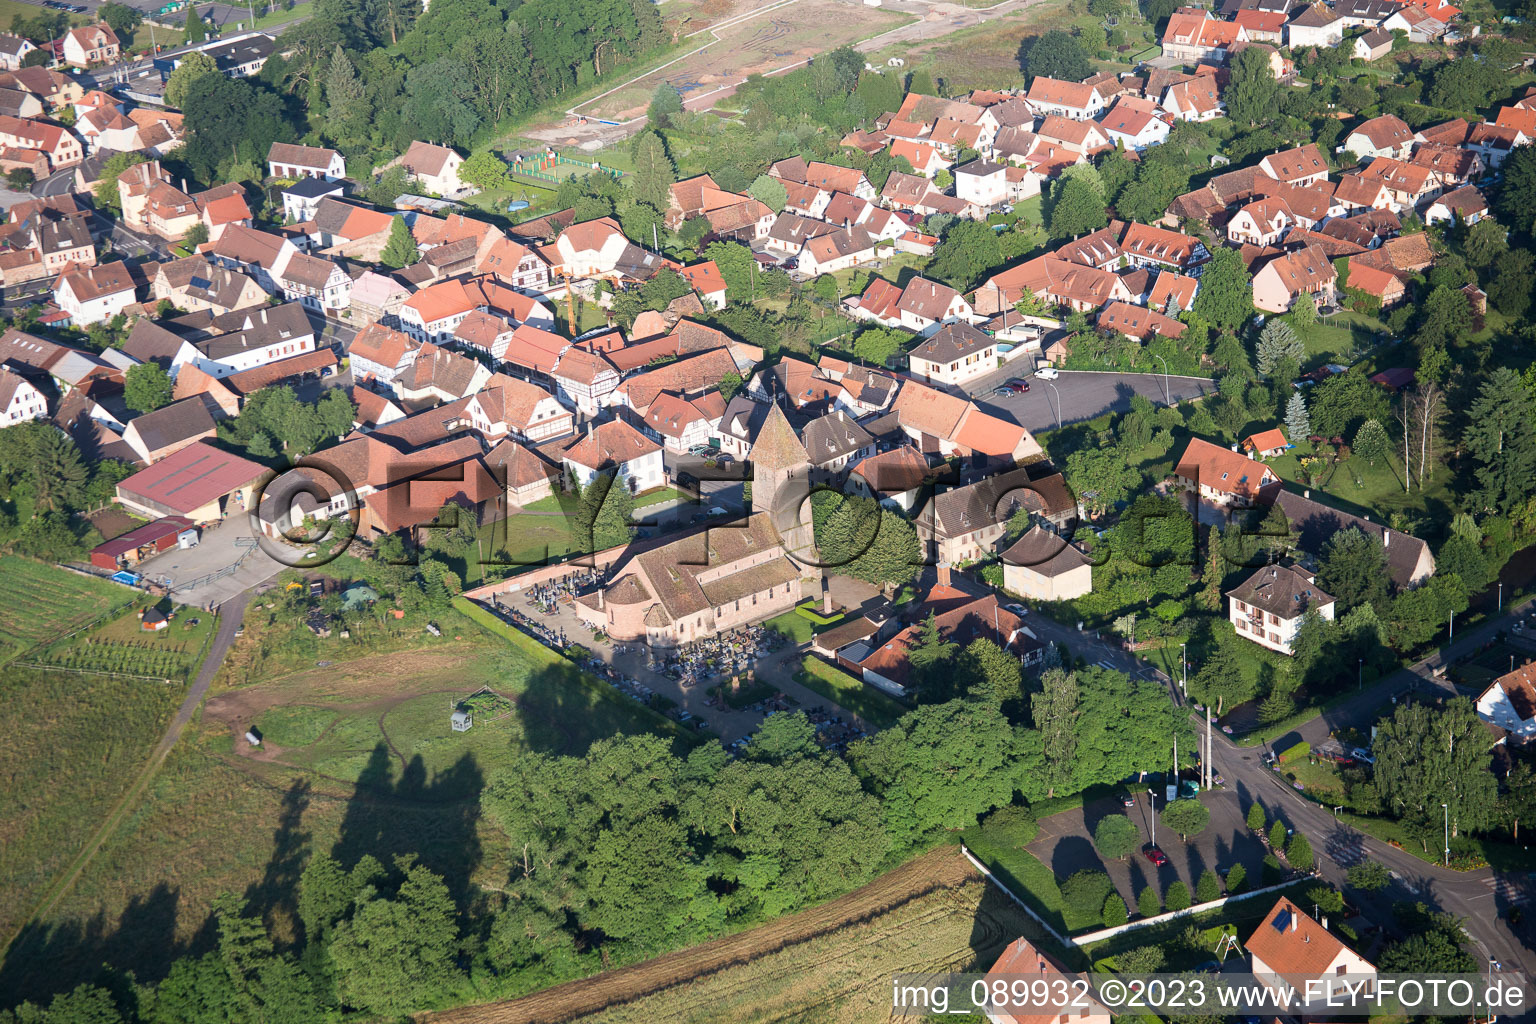 Drone image of Altenstadt in the state Bas-Rhin, France